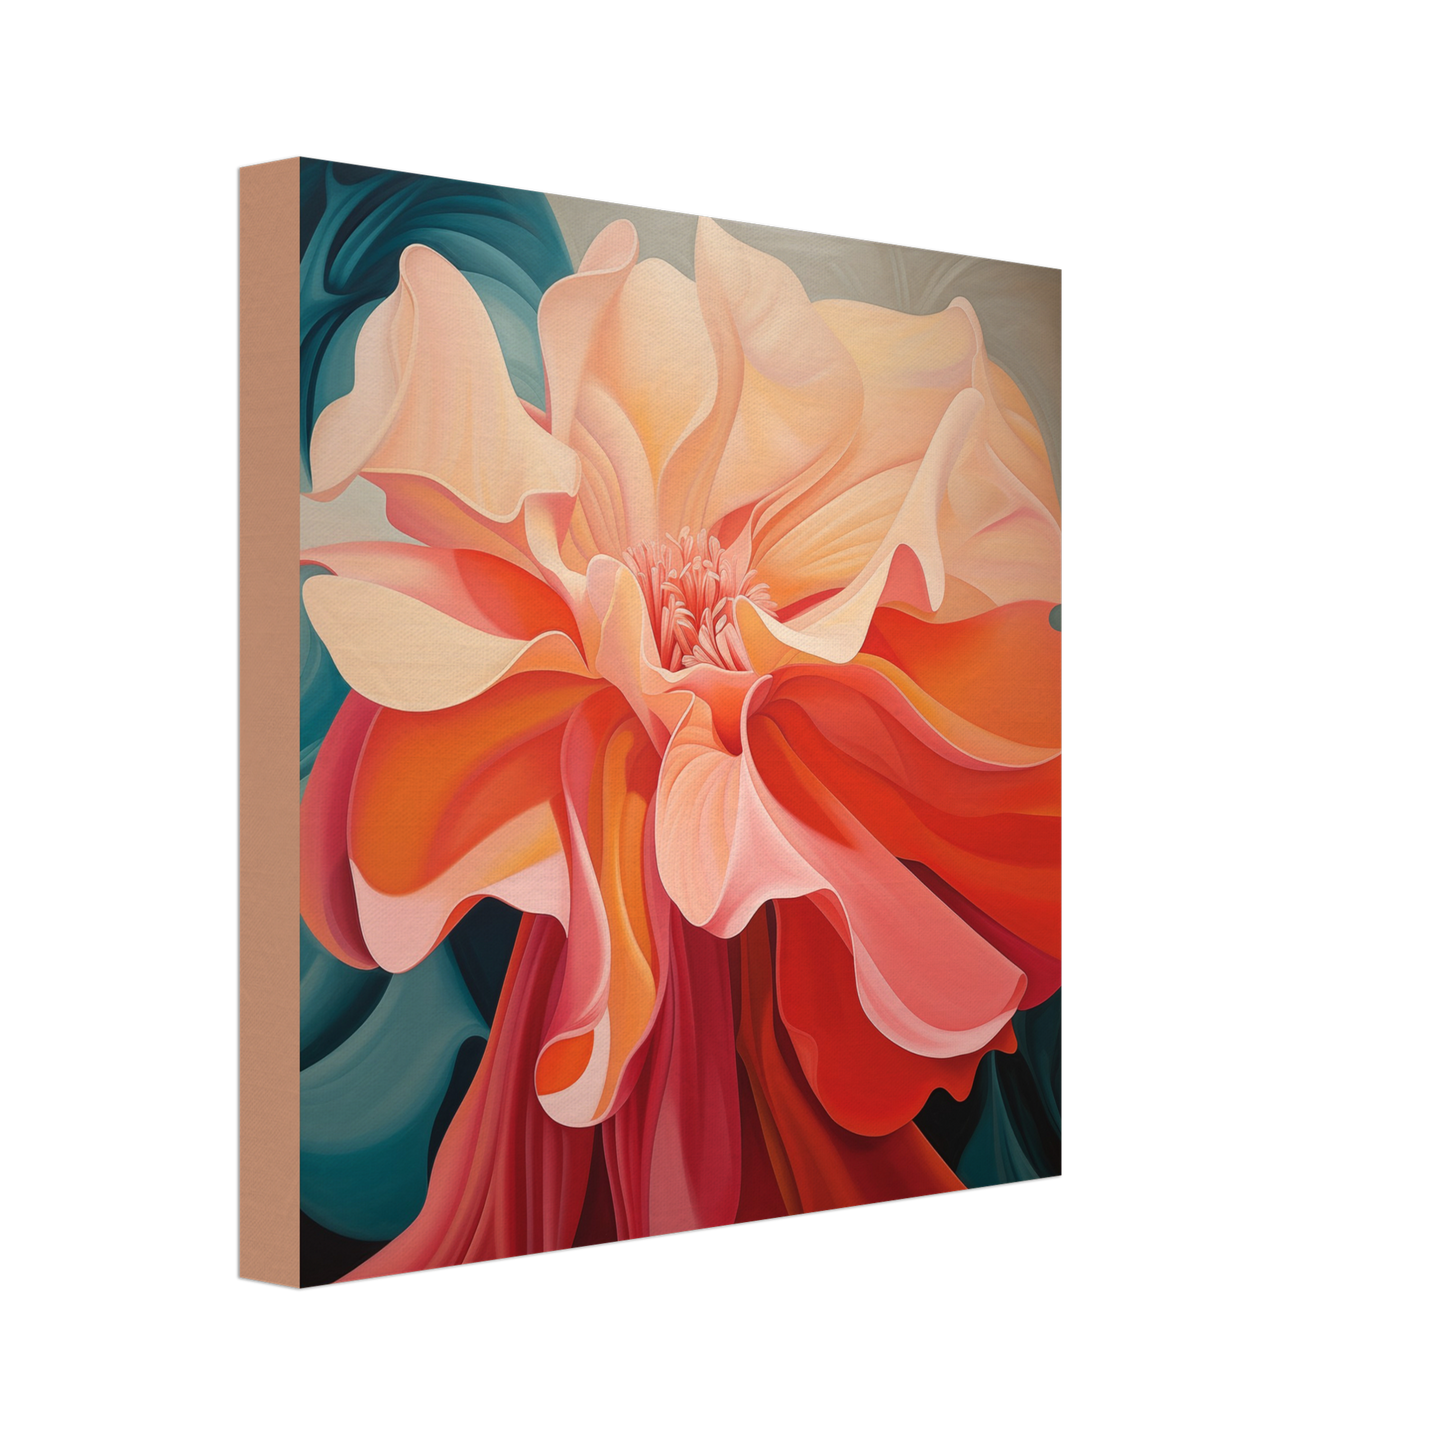 An abstract painting of The Wild In The Flower Inspired By Georgia O'Keefe - Canvas Print on a wooden frame, where the image quality and color remain unaffected.